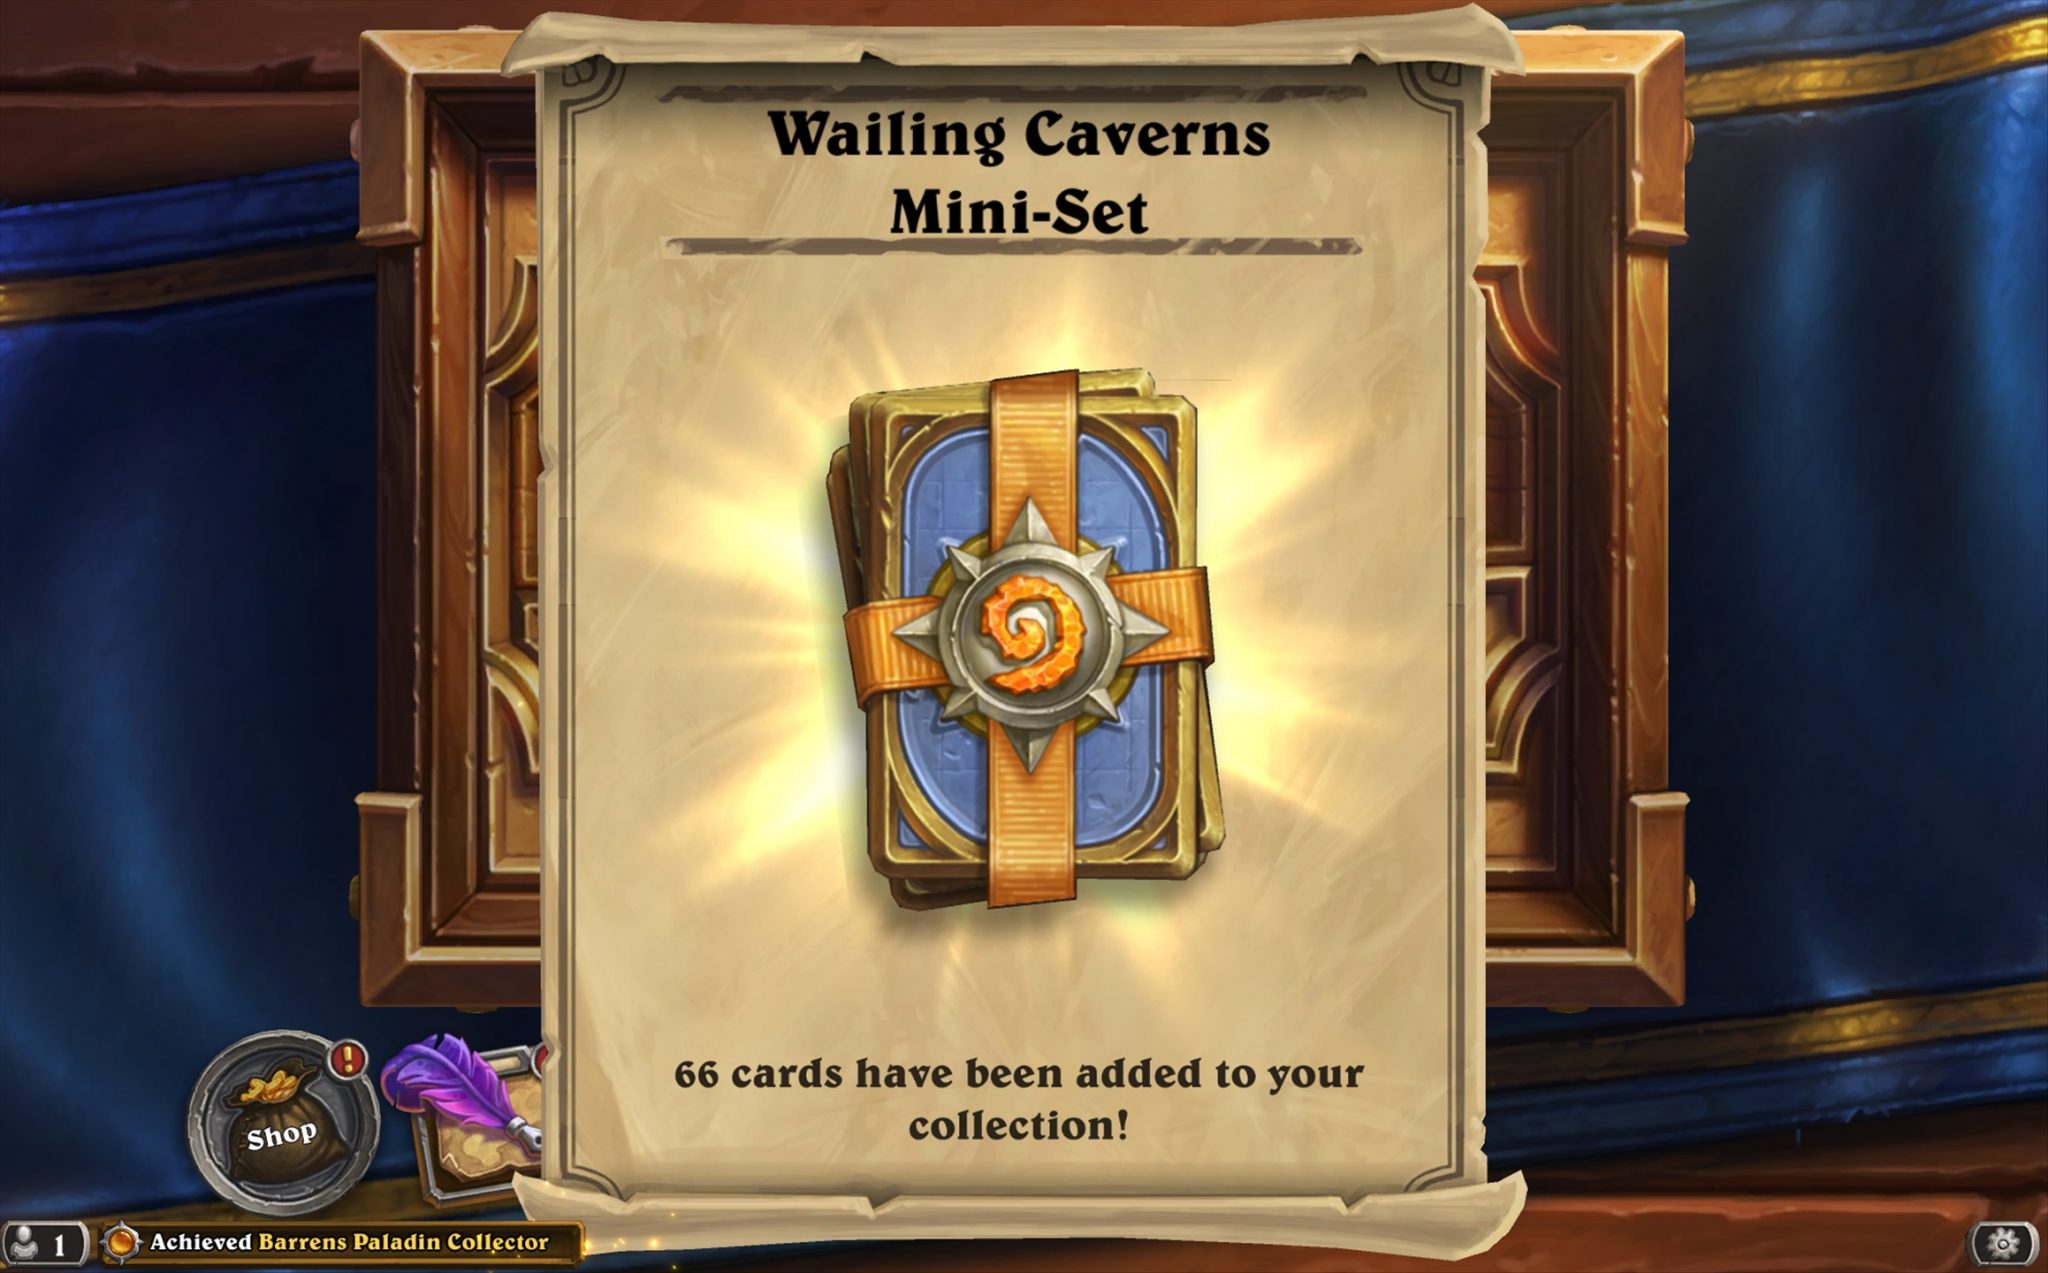 Blizzard Hearthstone S Latest Updates Includes New Collectible Card